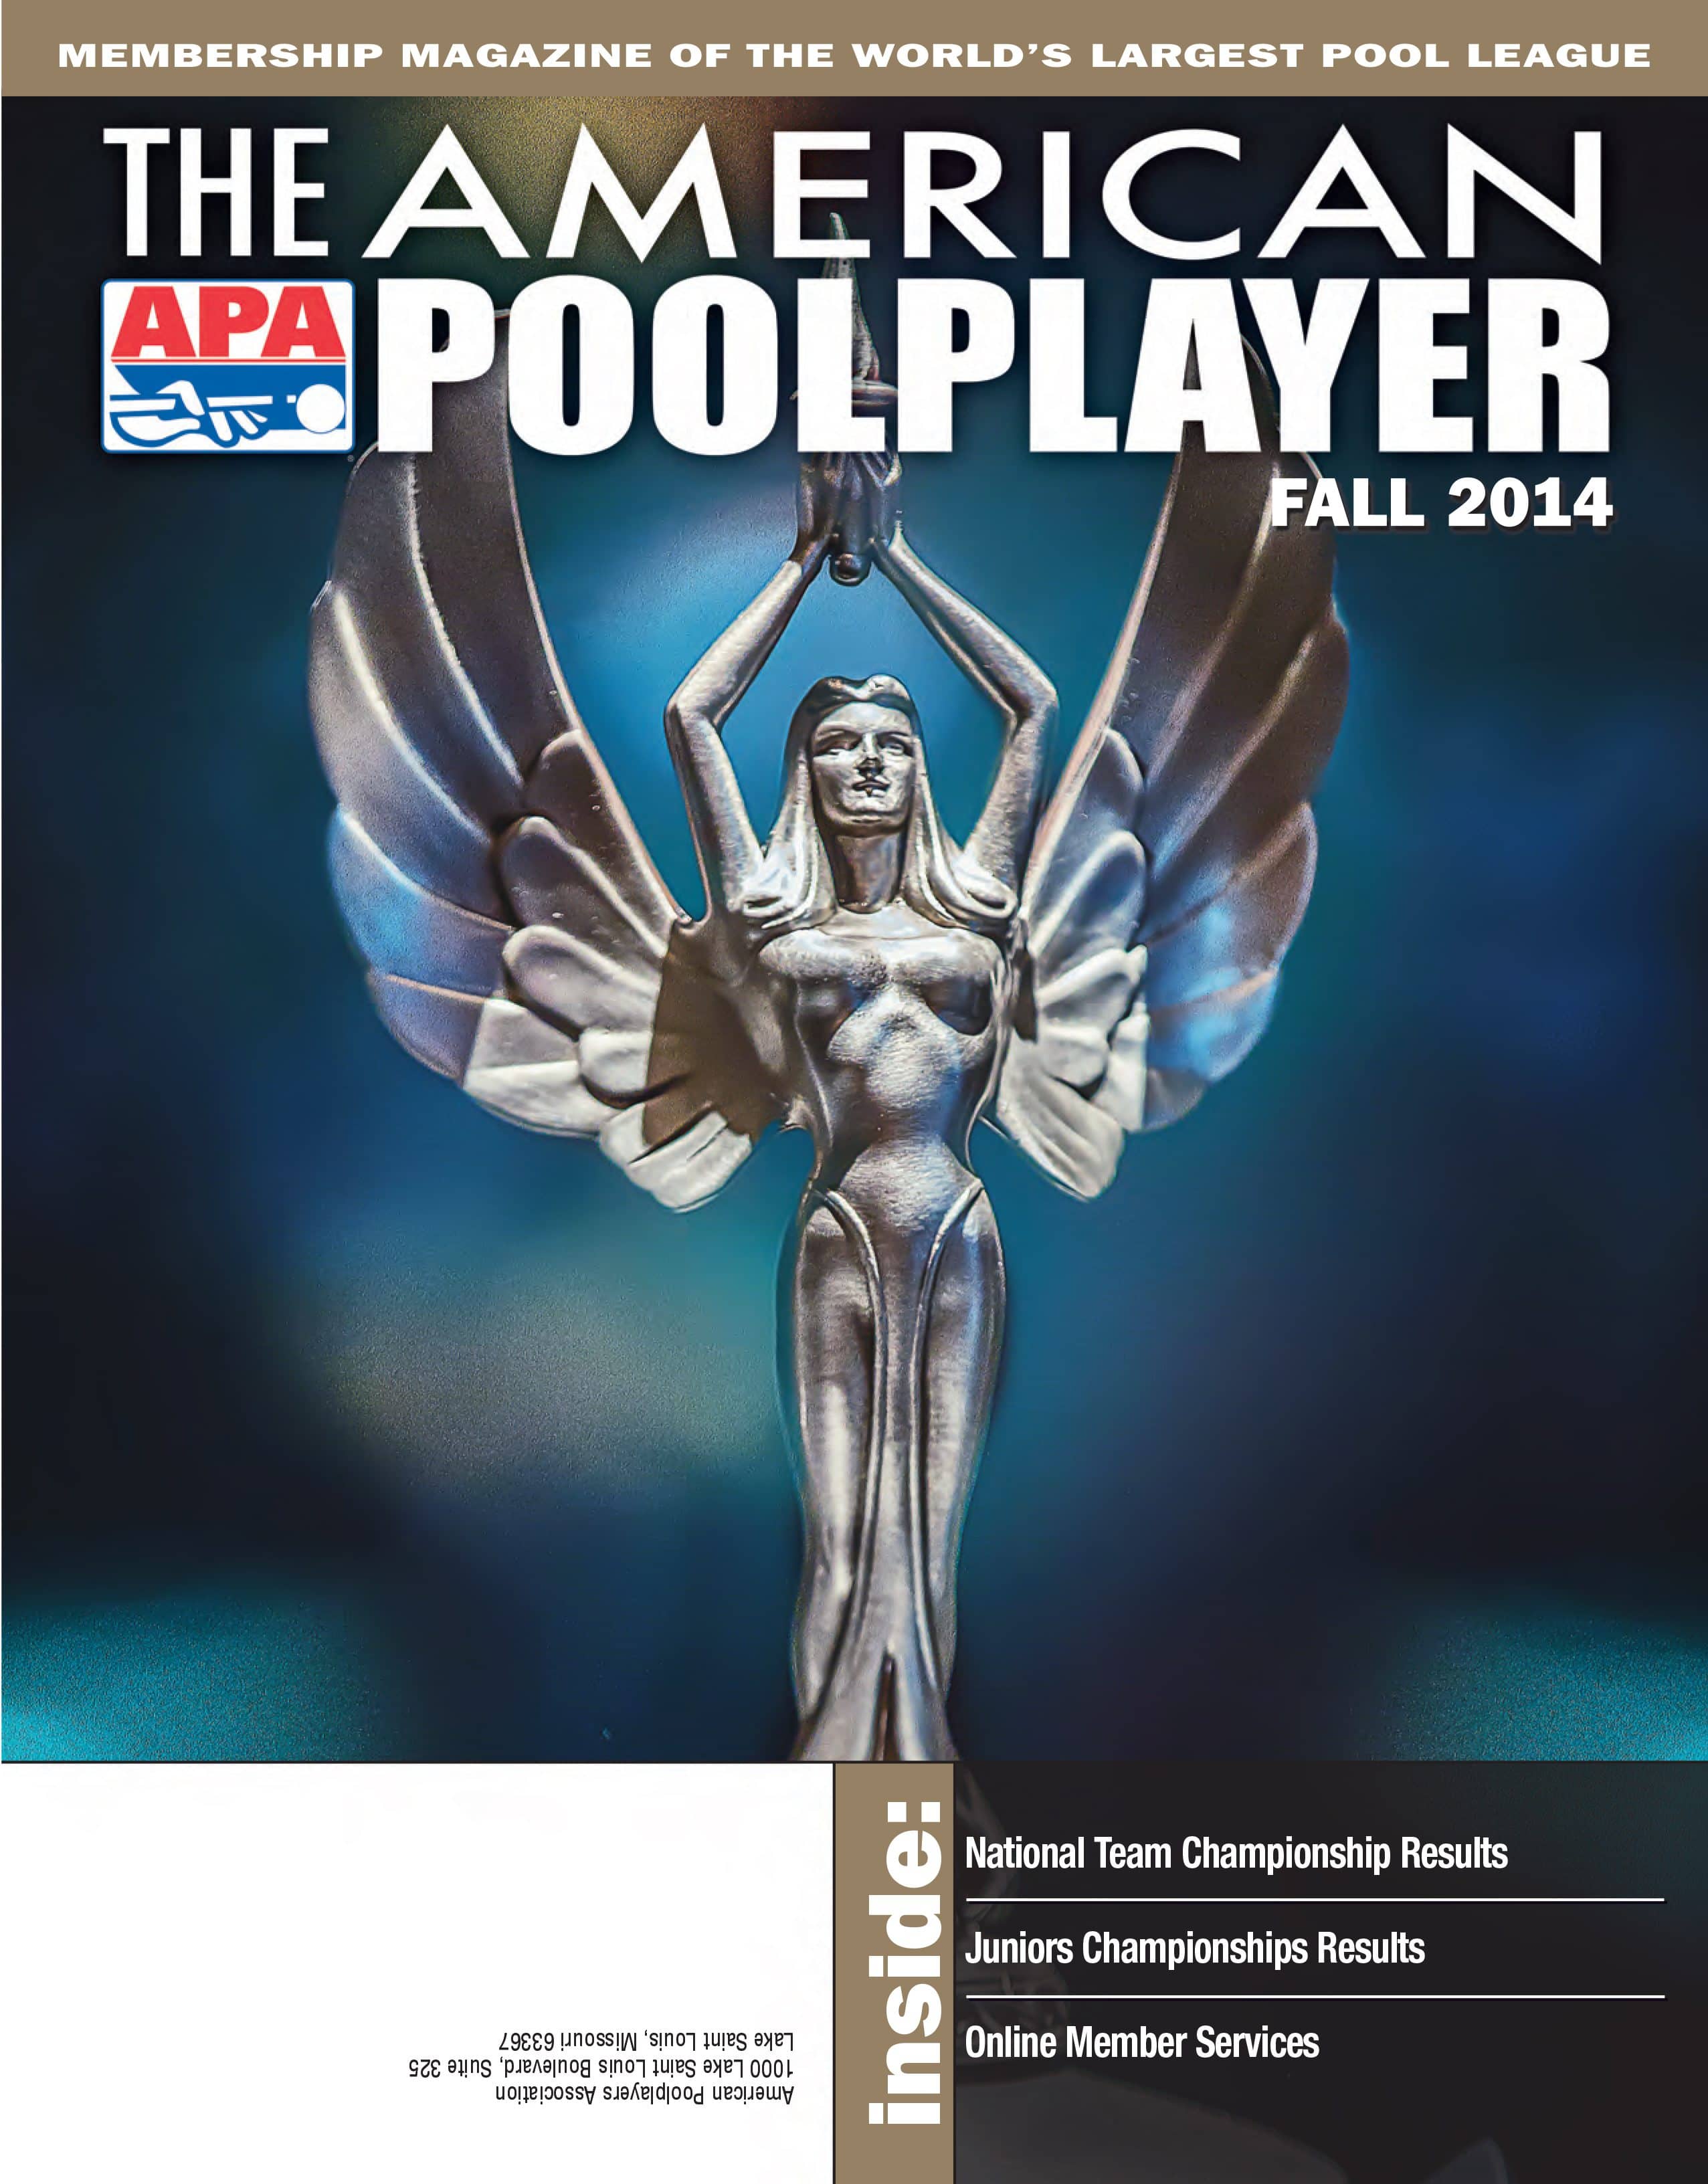 Fall 2014 Issue of The American Poolplayer Magazine